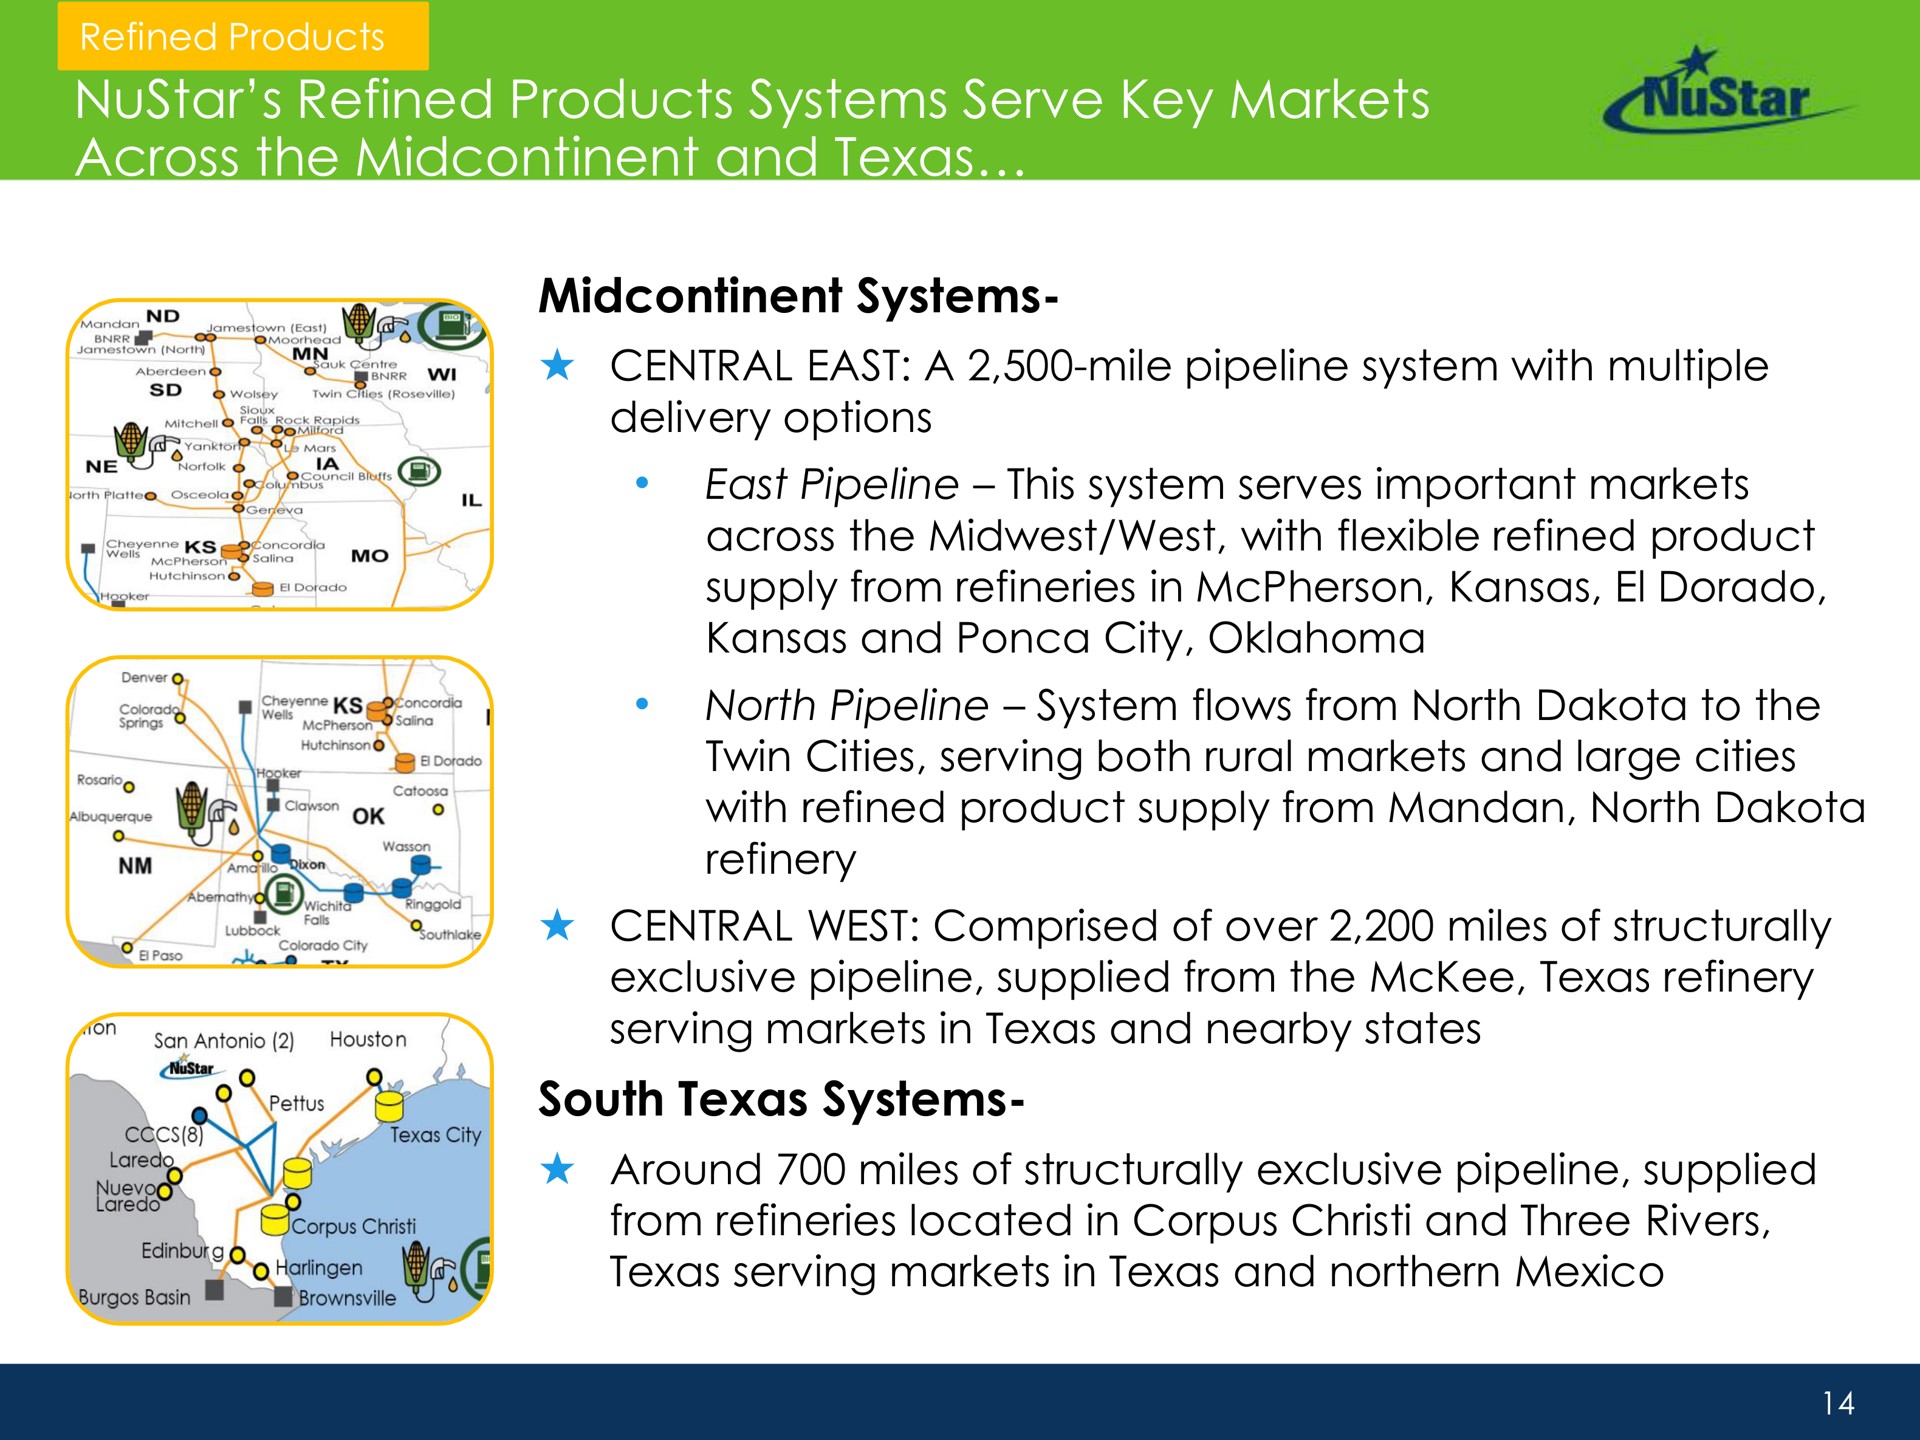 refined products systems serve key markets across the and systems south systems twin cities serving both rural large cities central west comprised of over miles of structurally | NuStar Energy